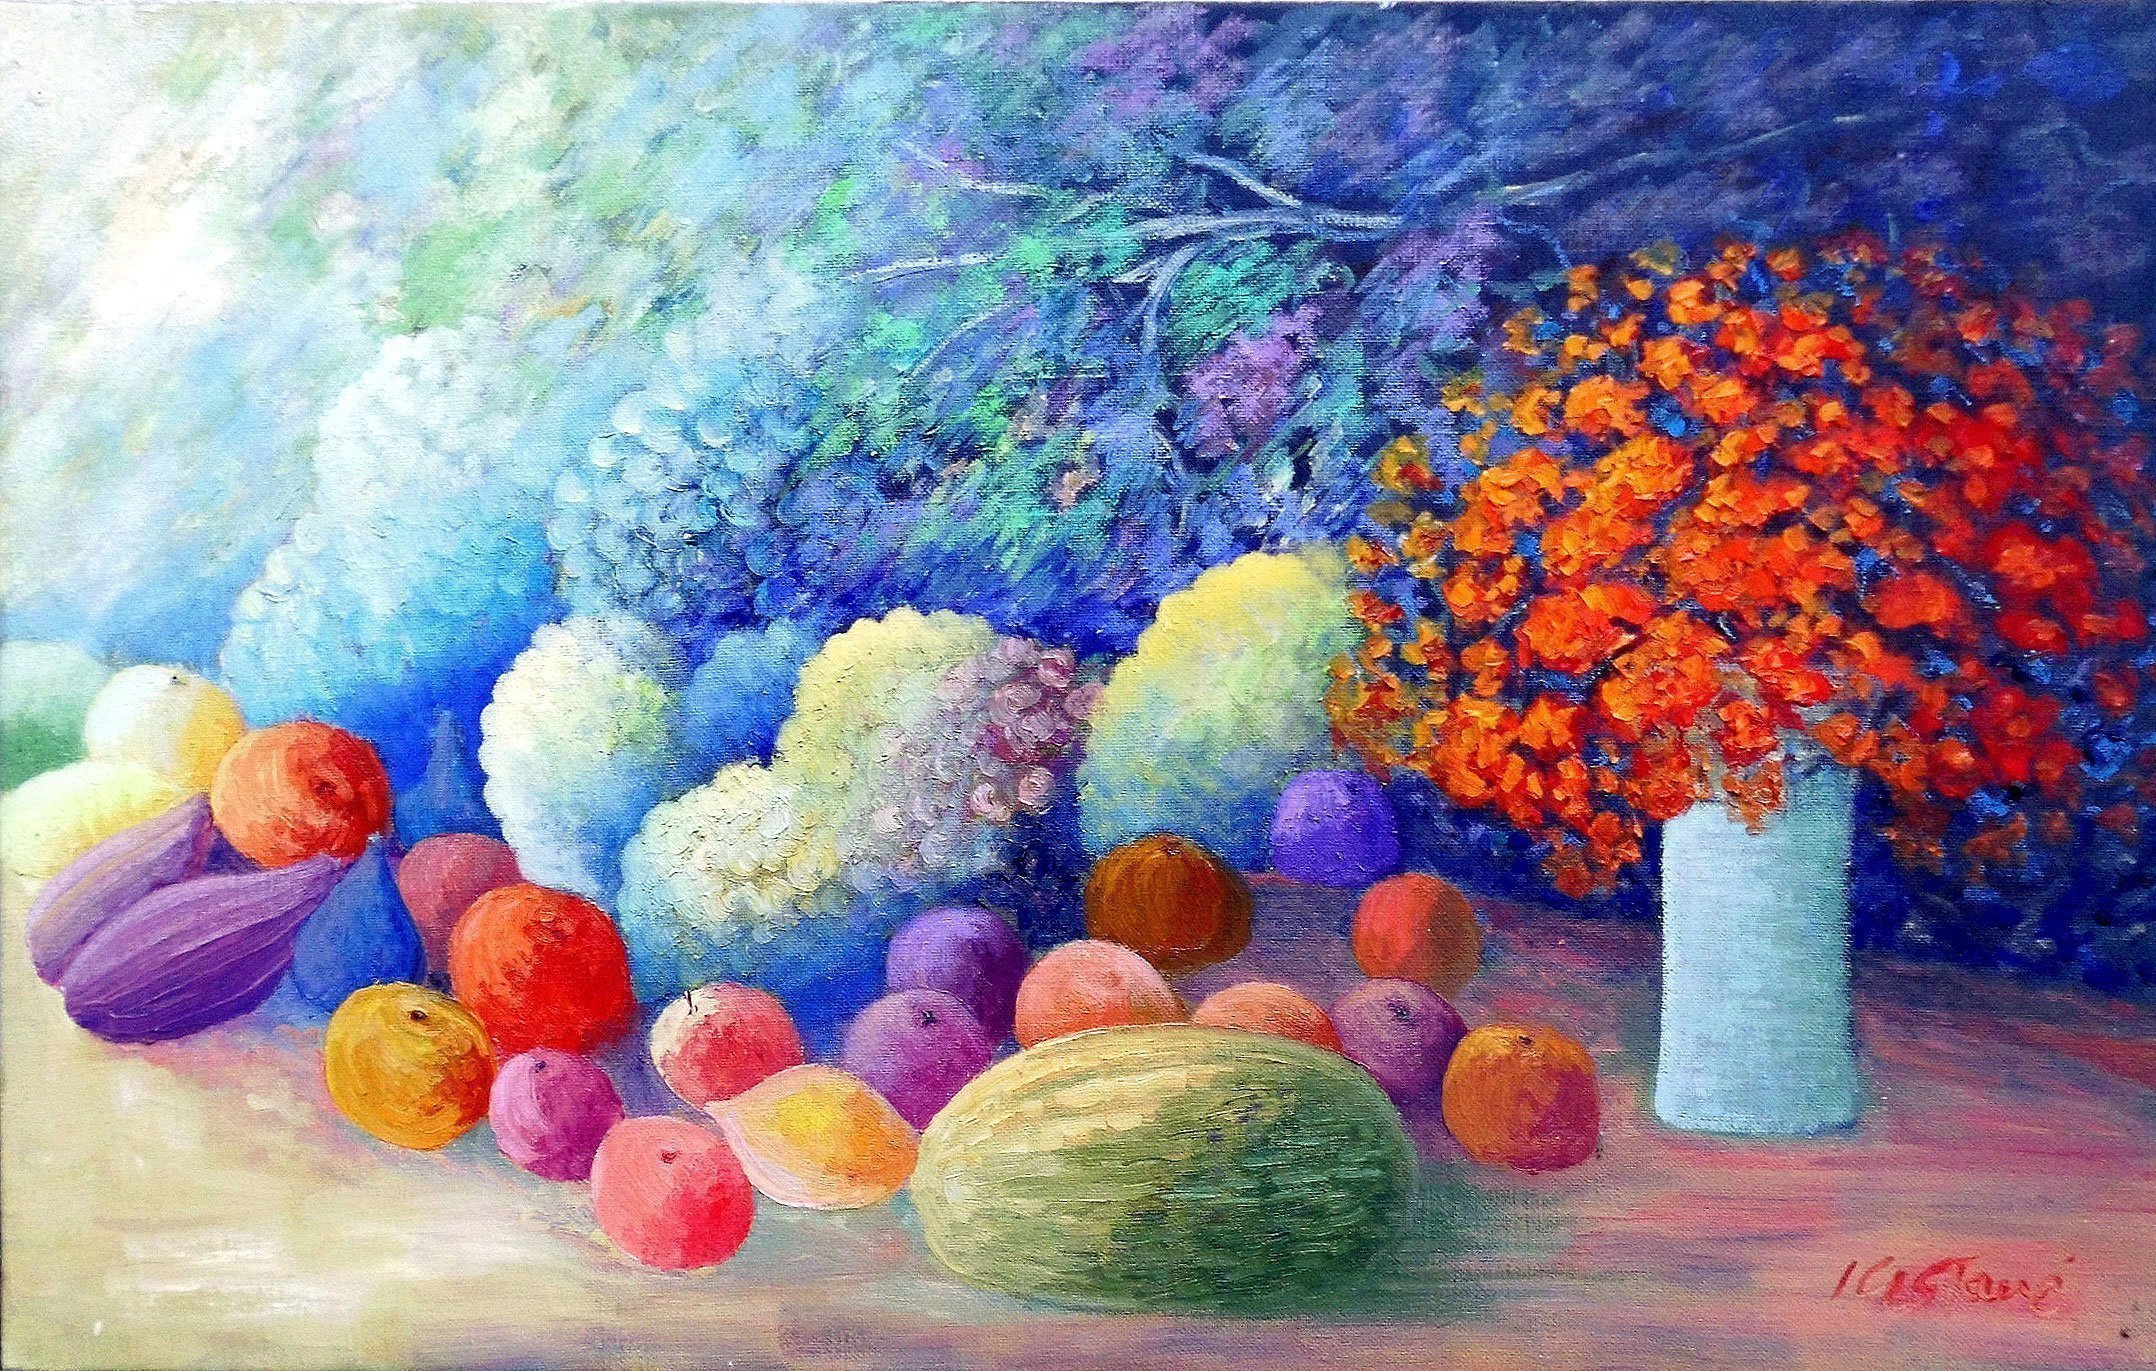 Isidro Cistare; Bodegon Luces Y Sombras, 2006, Original Painting Oil, 130 x 80 cm. Artwork description: 241 Oil painted on canvas with spatula and brushes with great contribution of matter.  The artist wanted to reflect in this still life the light that comes from the left creating shadows, which enhance the contrast of the colors.  Work with lots of light and color typical of ...